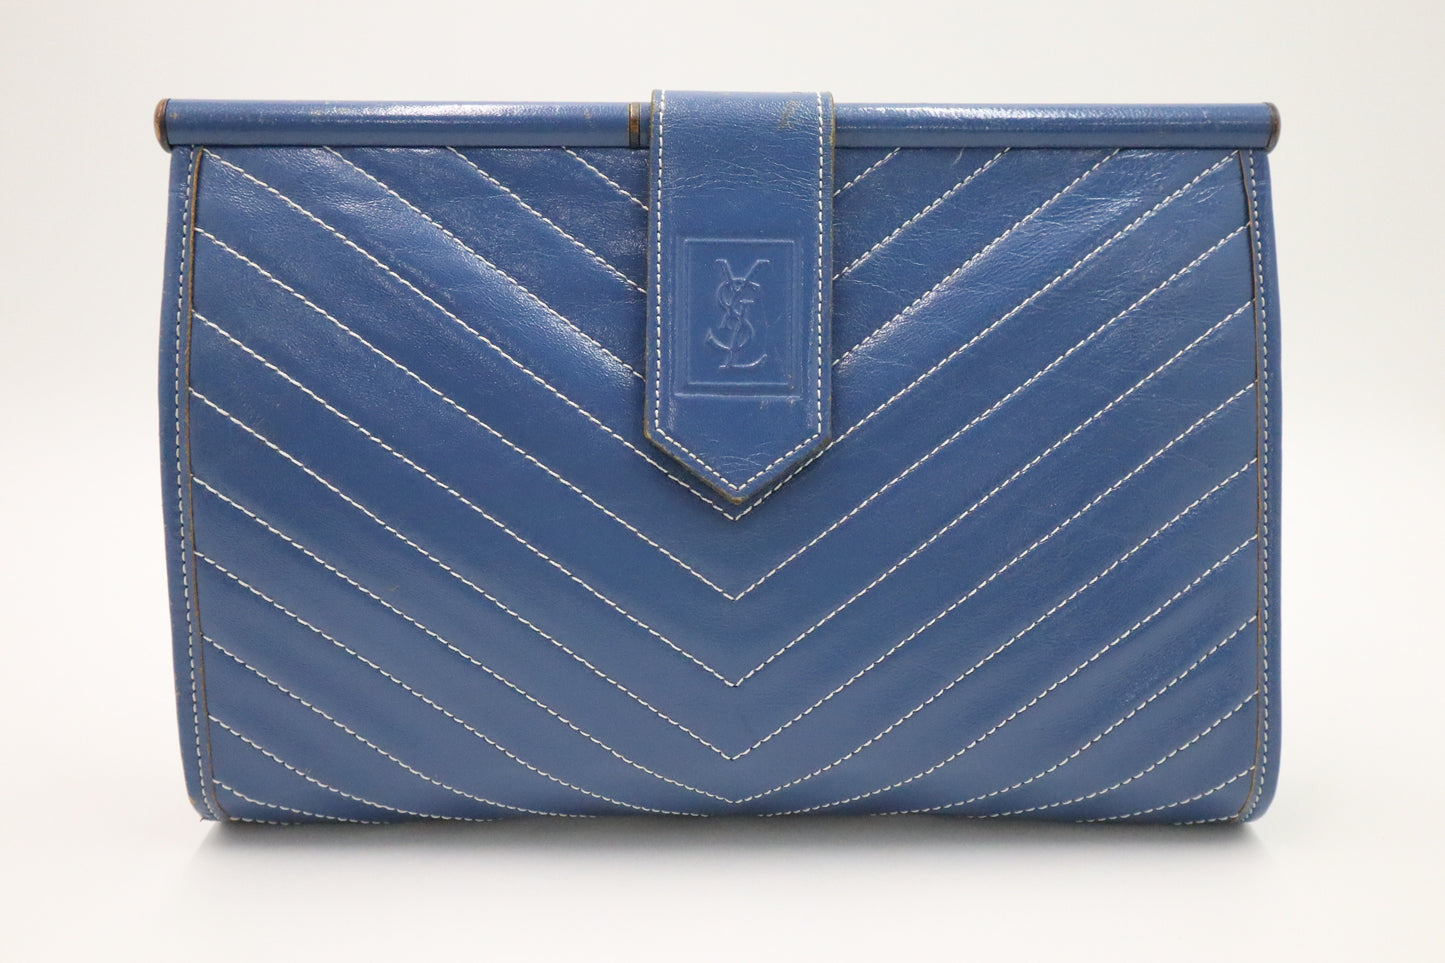 YSL Saint Laurent Clutch in Blue Leather